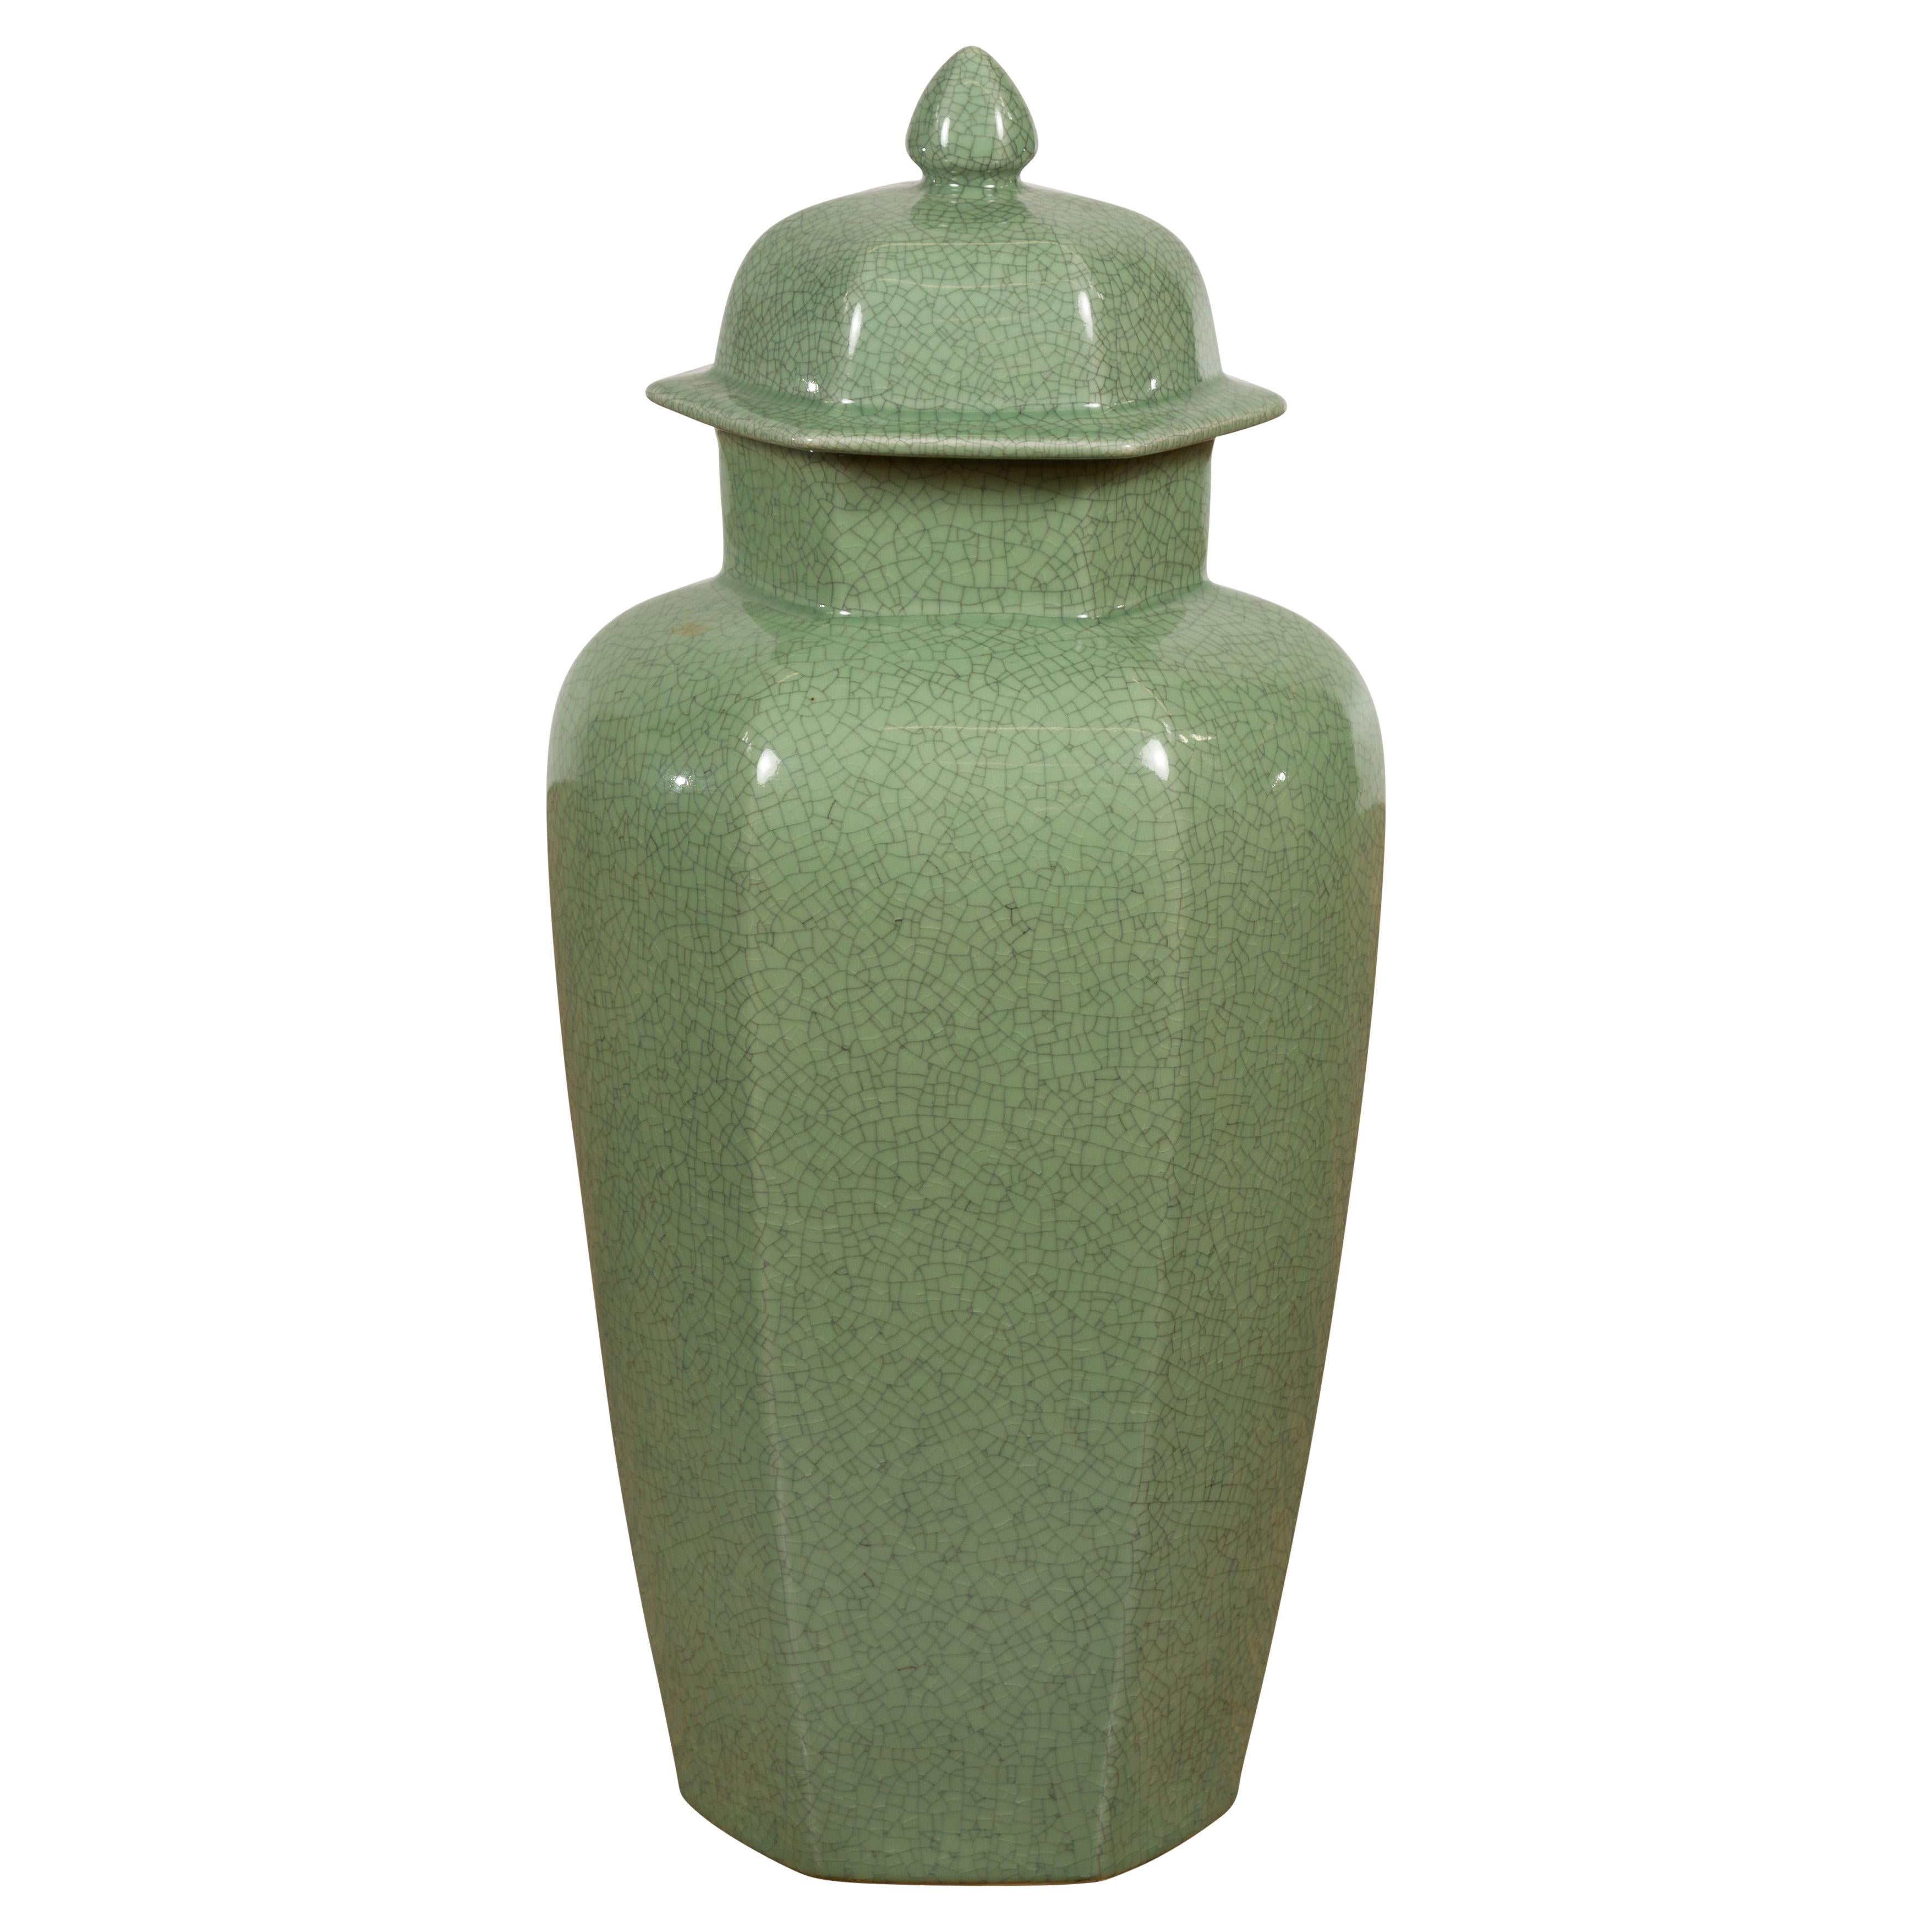 A vintage Chinese celadon color altar vase with hexagonal lid, bud top, tapering lines and elegant crackle design. This vintage Chinese altar vase evokes a sense of serene elegance with its soft celadon color and distinctive crackle design.